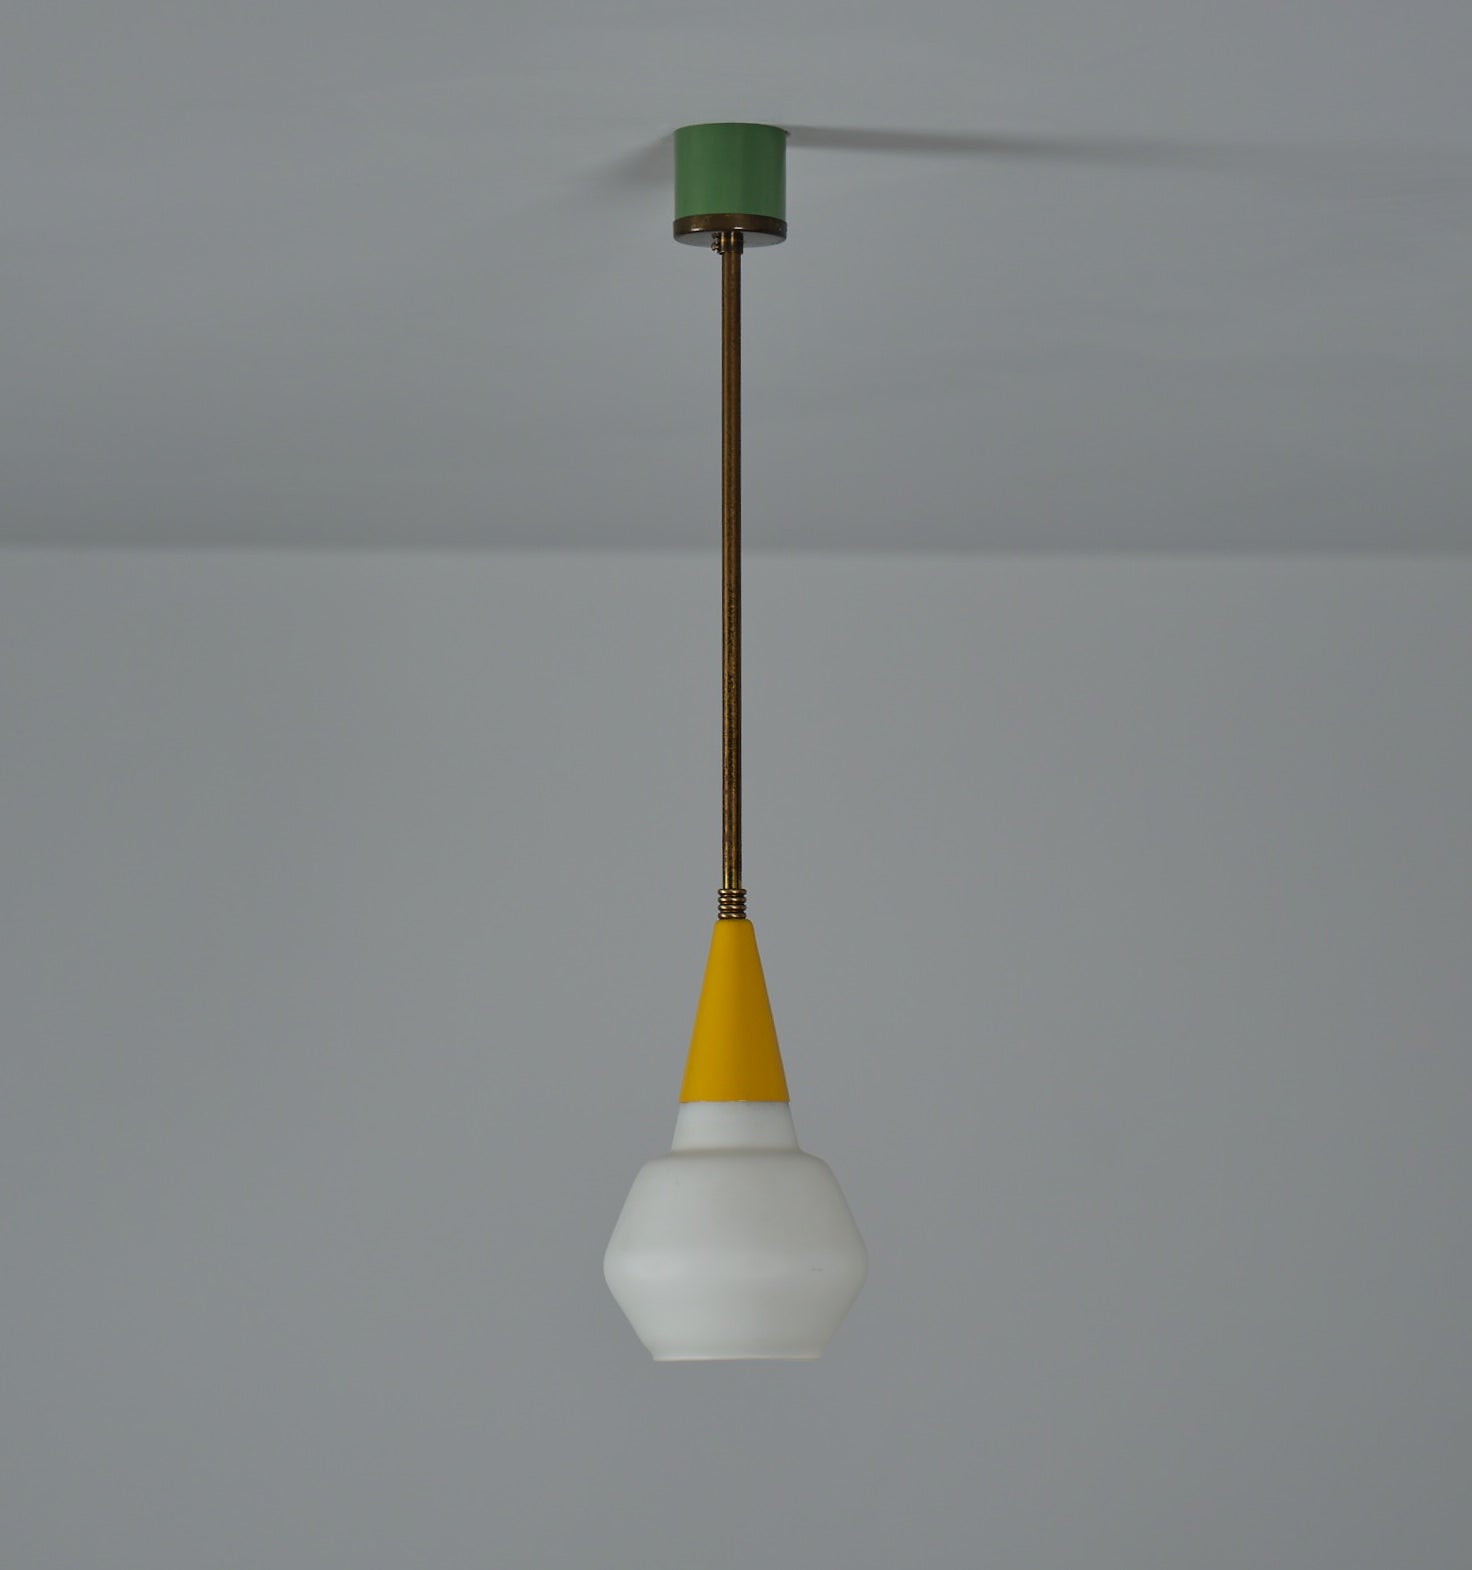 Italian midcentury ceiling pendant light, crafted in the 1950s with a fusion of timeless elegance and modern design. This small single-bulb fixture features a stunning combination of brass and lacquered metal in vibrant yellow and green hues,